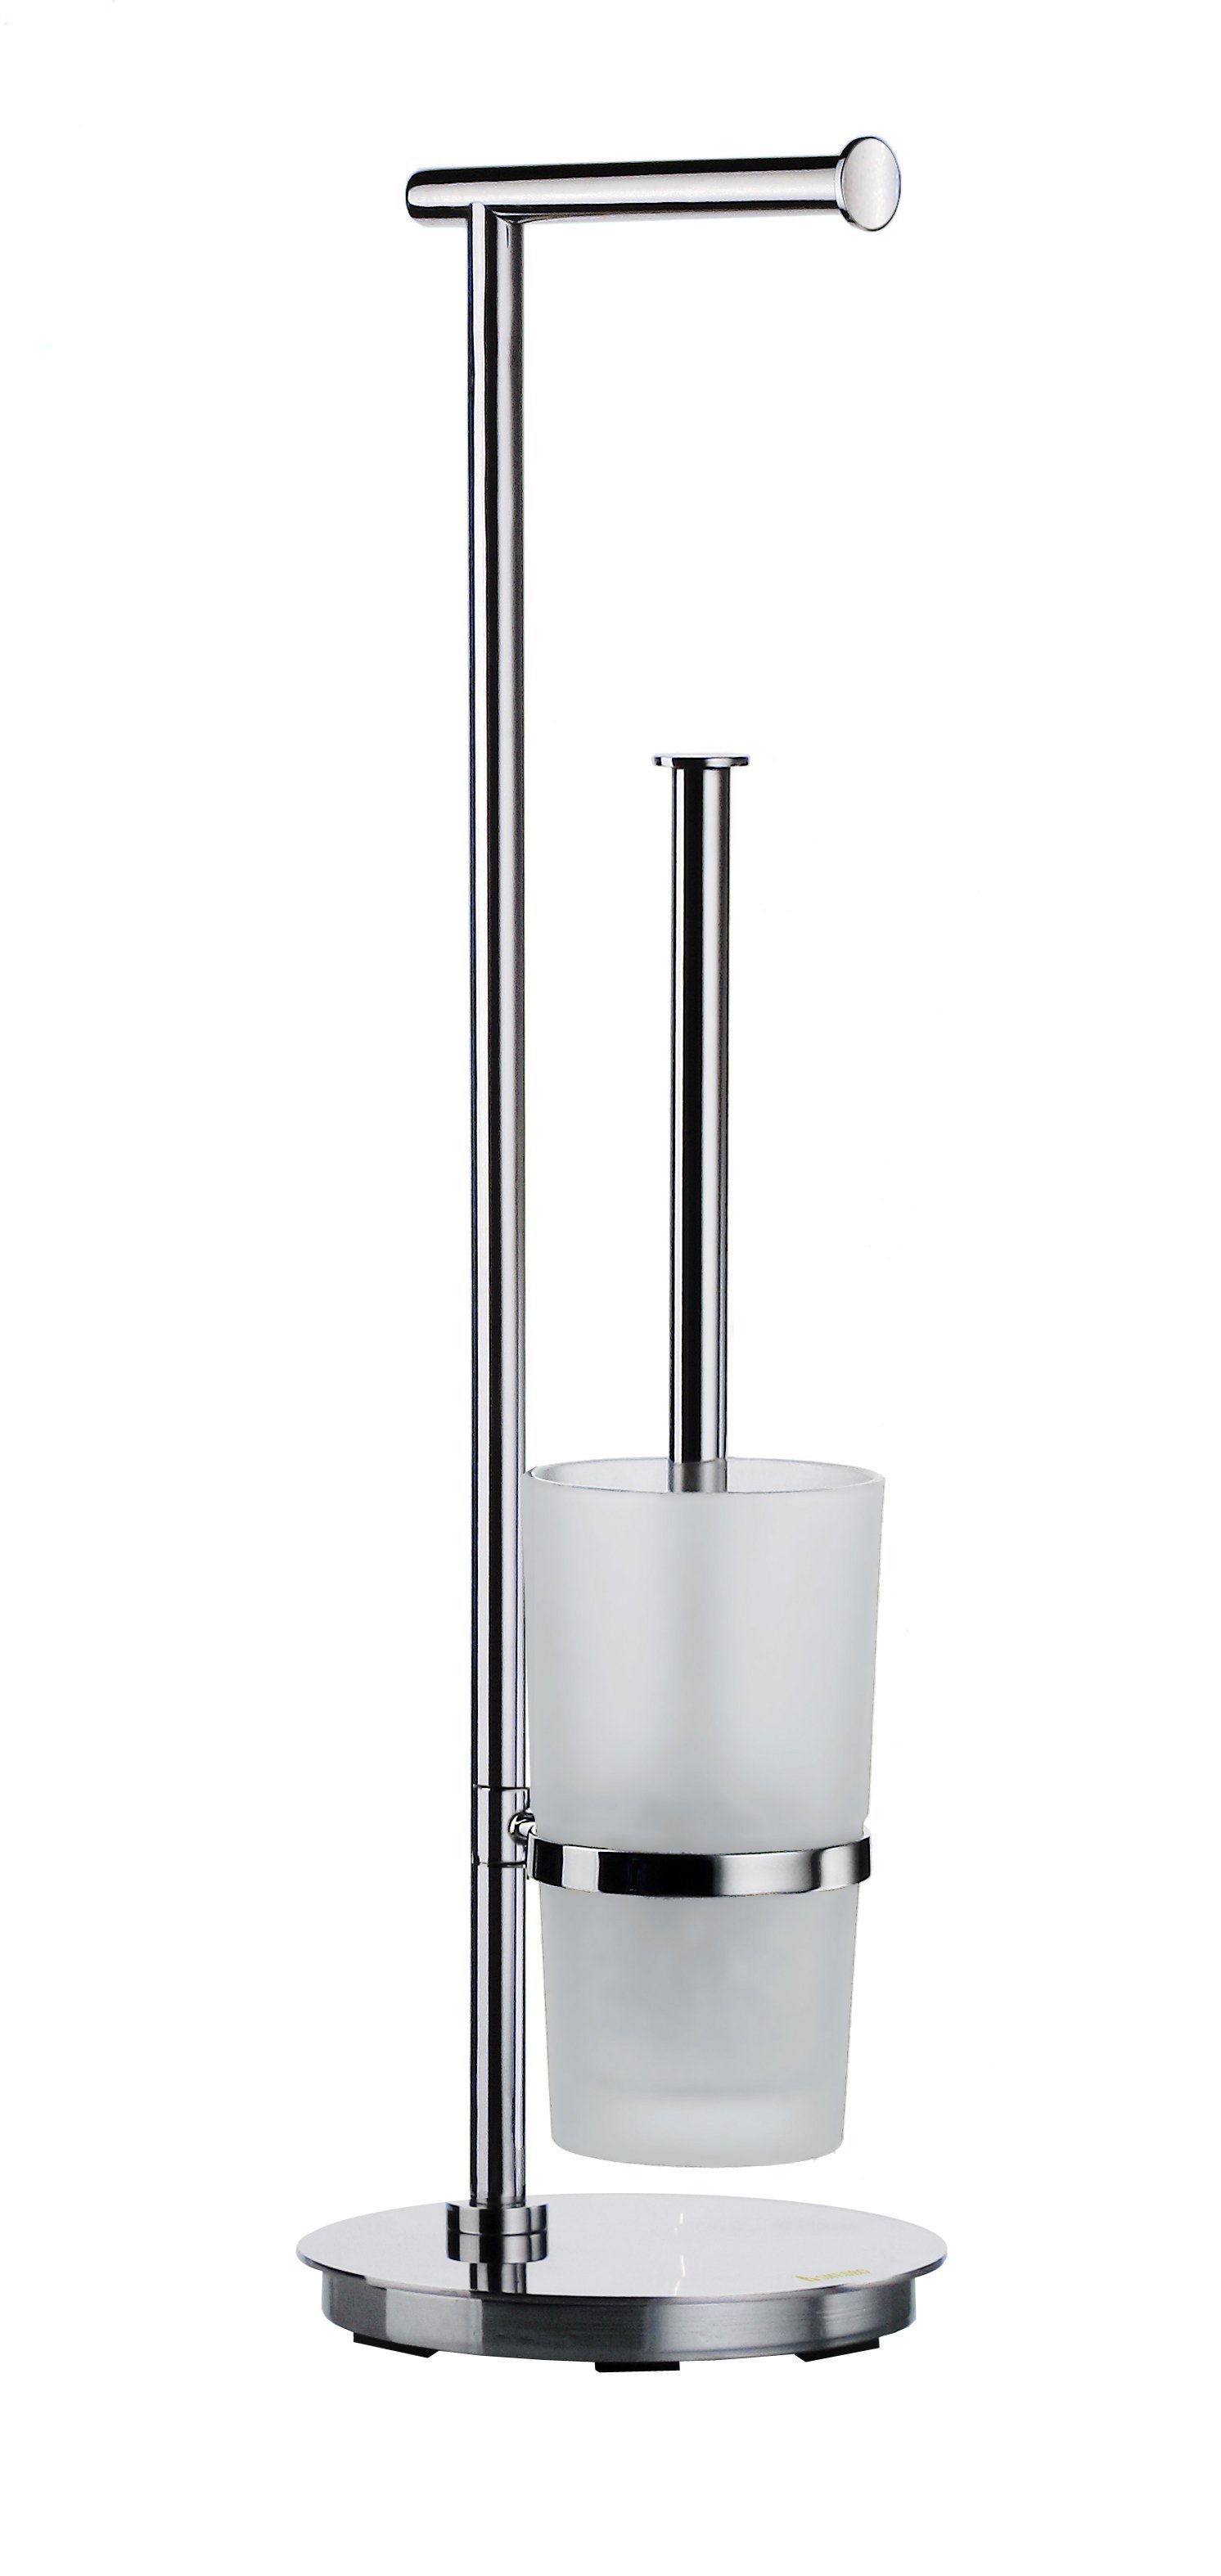 Lite Toilet Brush/Roll Holder with Round Base in Stainless Steel Polished